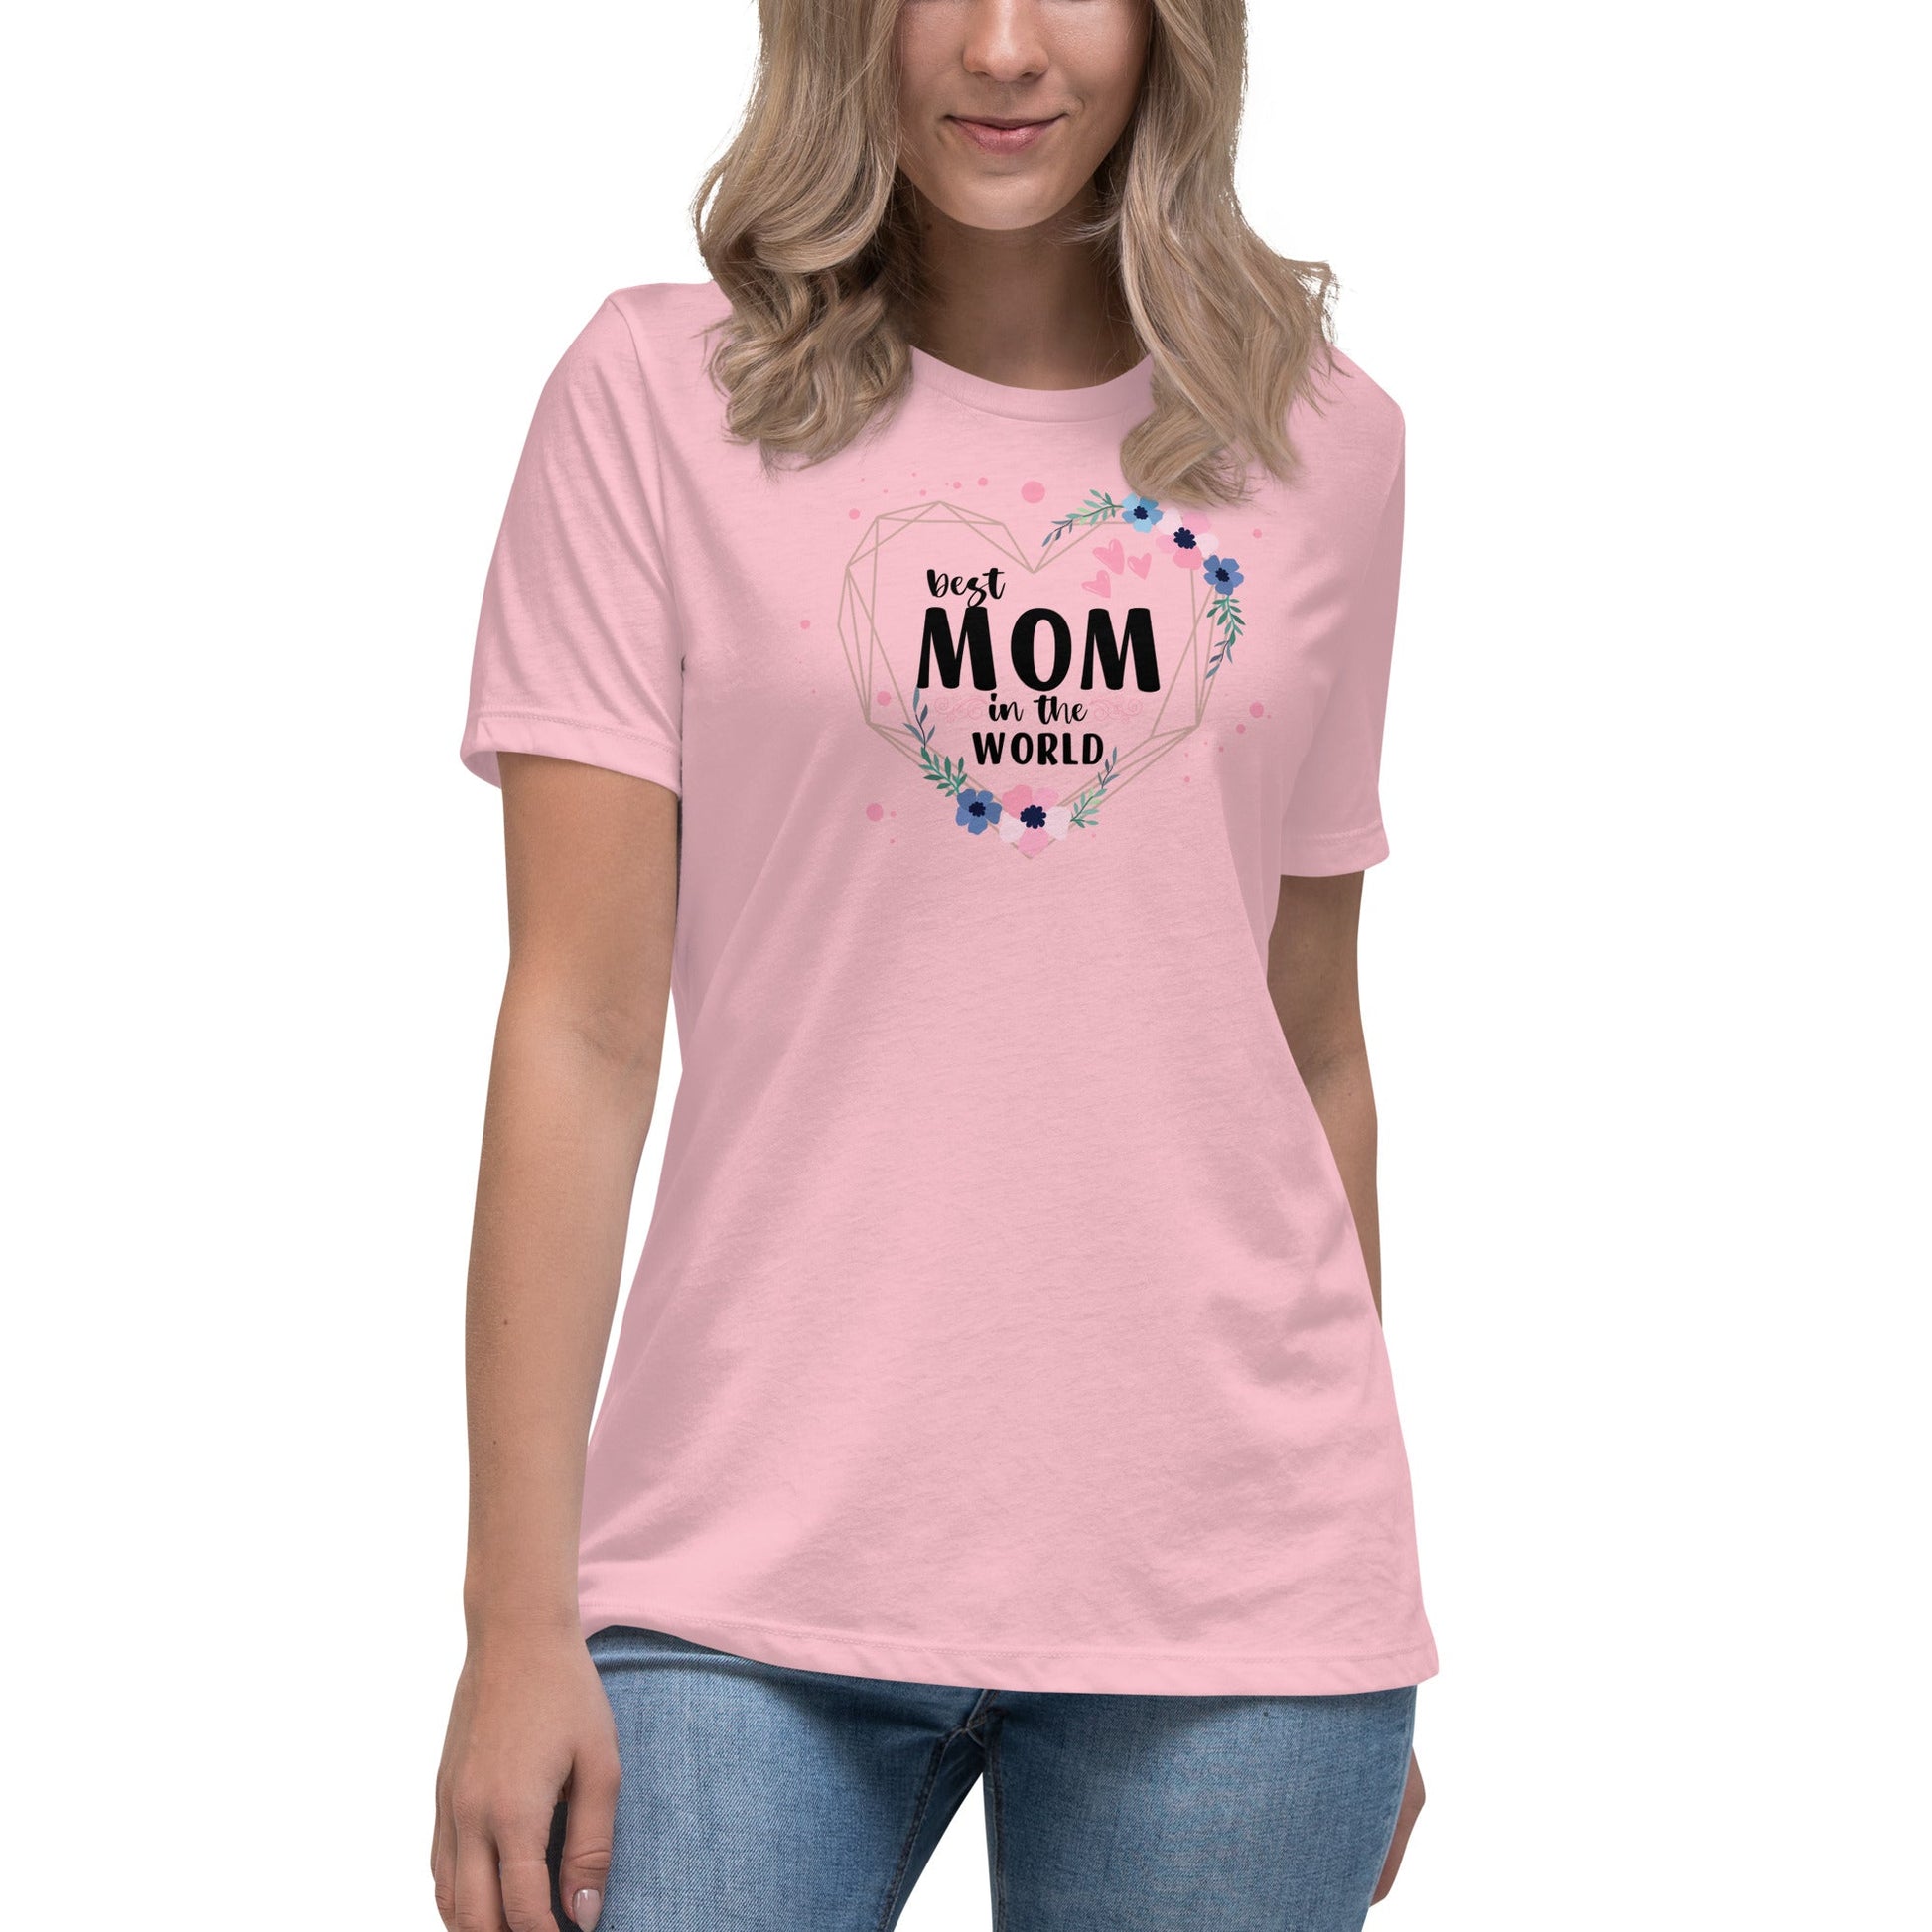 Best Mom in the World! Women's Relaxed T-Shirt - The Grateful Hearts